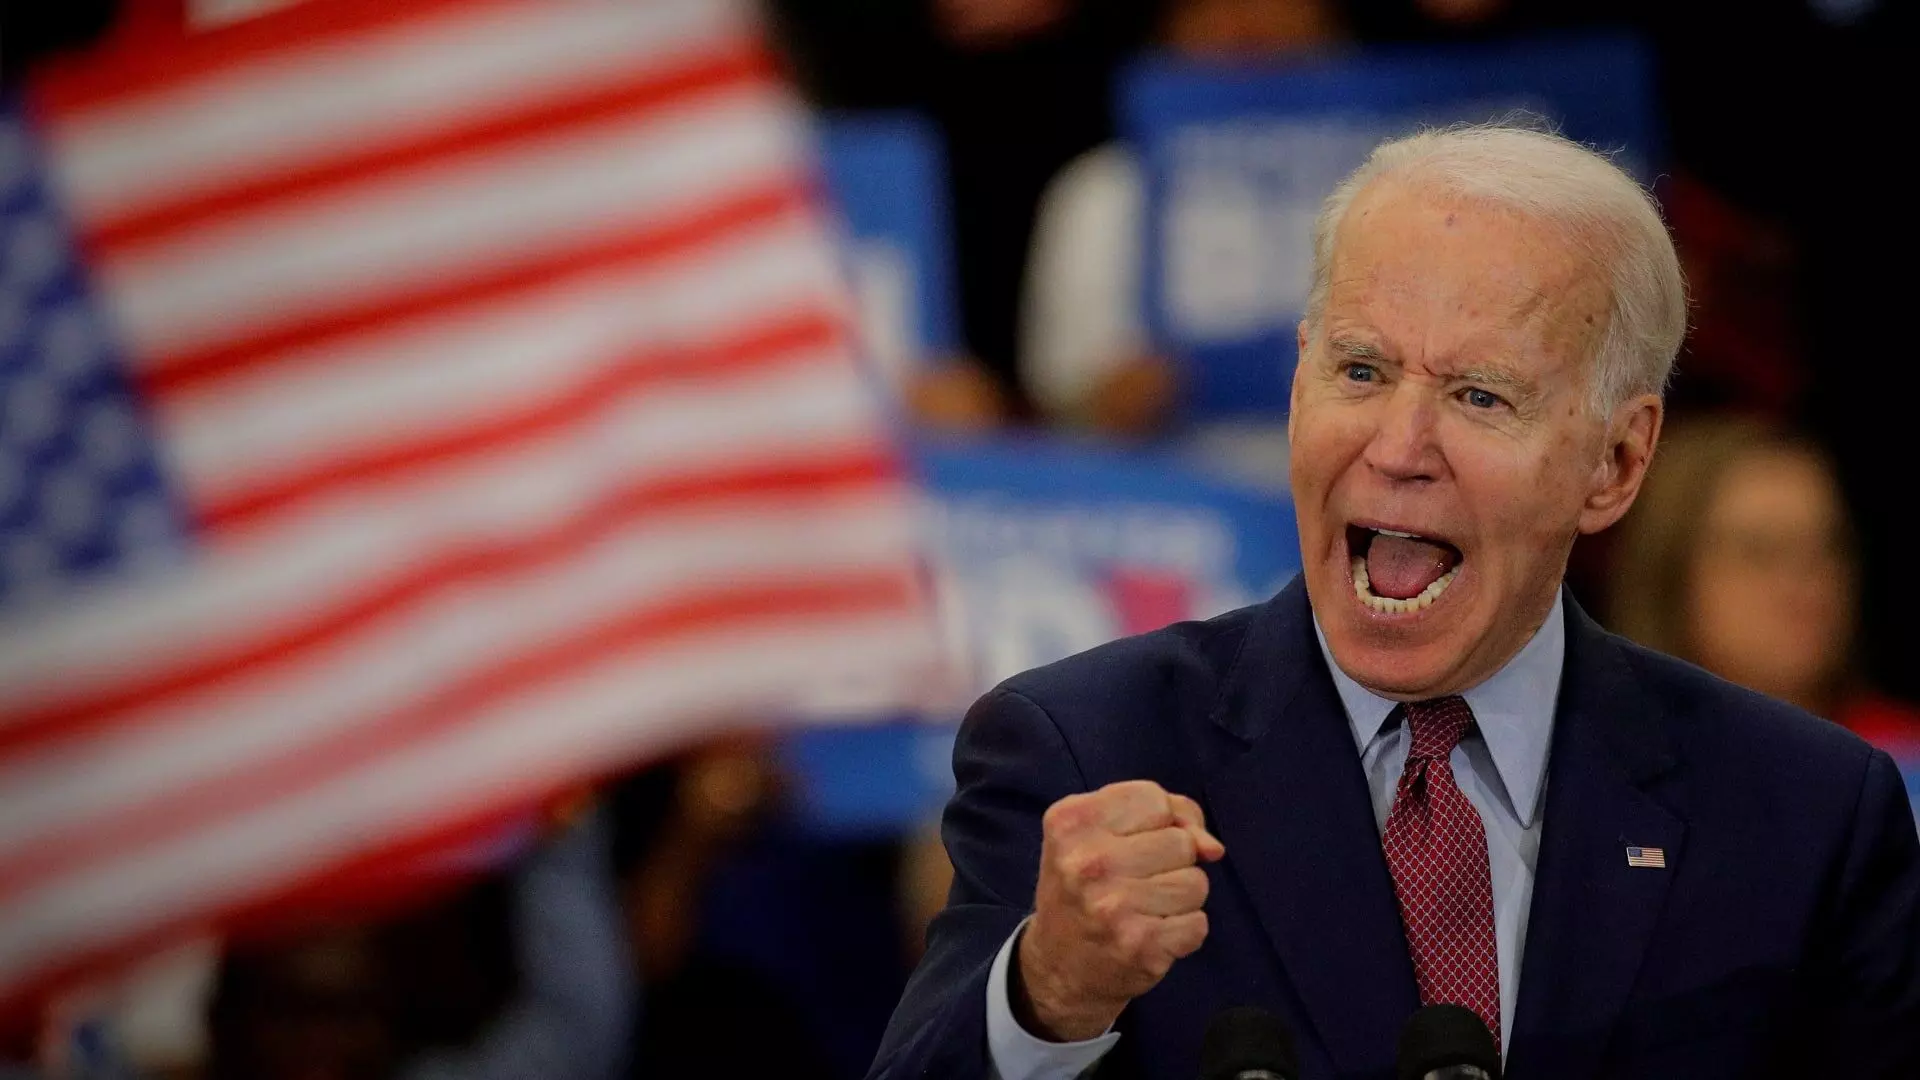 Joe Biden becomes the next President of America by defeating Donald Trump